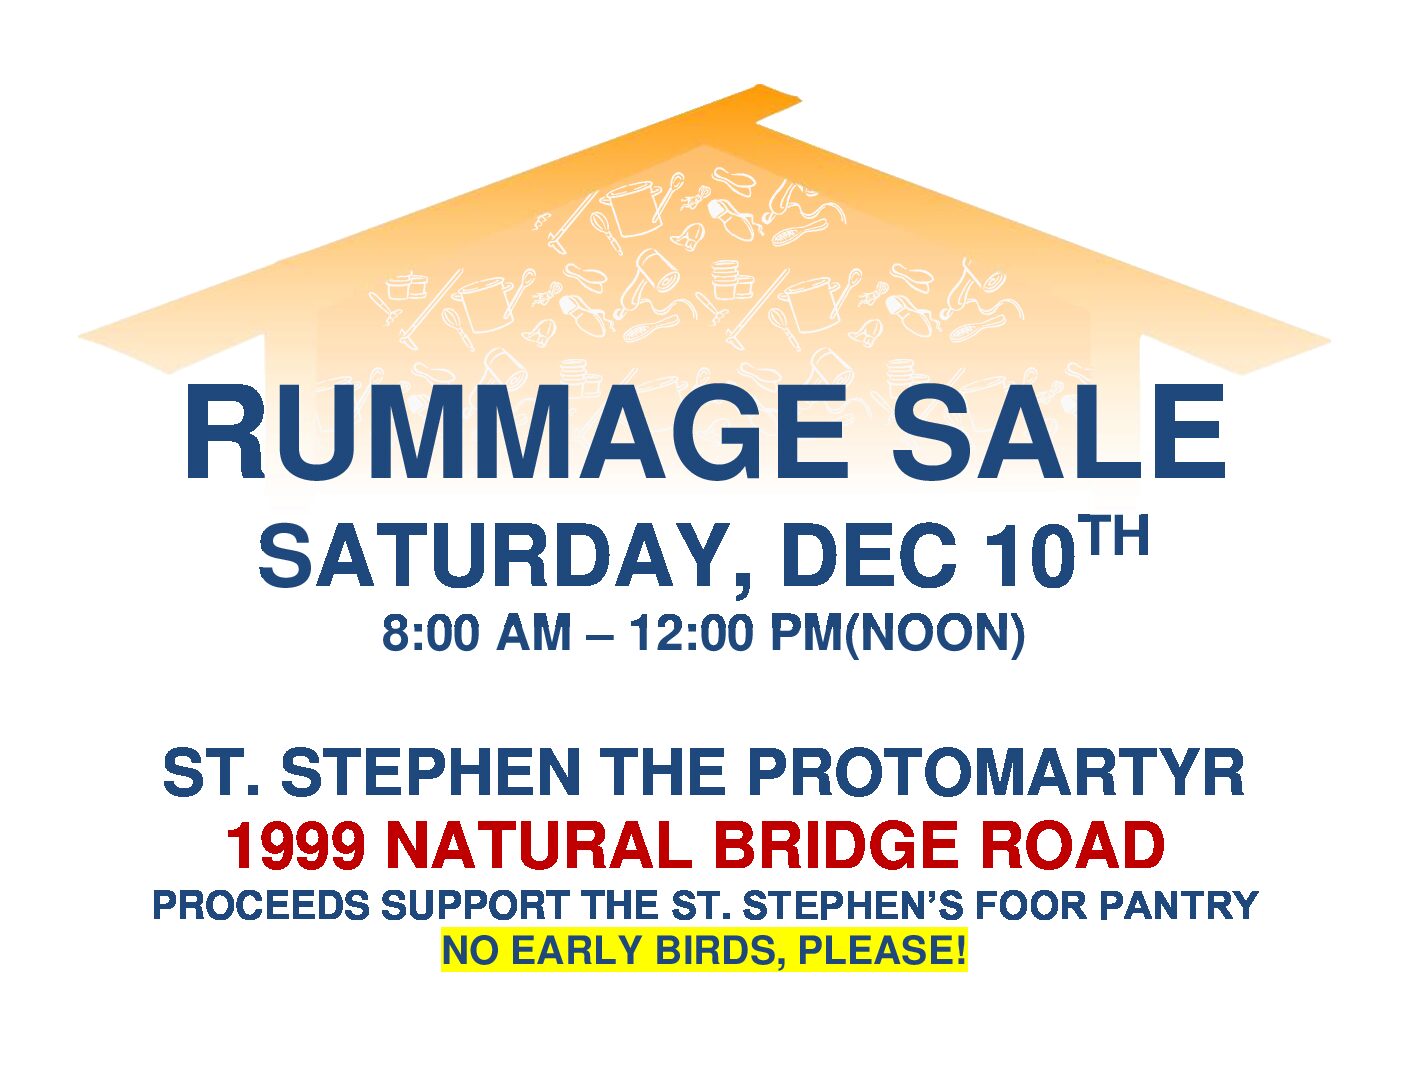 Rummage Sale at St. Stephens the Protomartyr